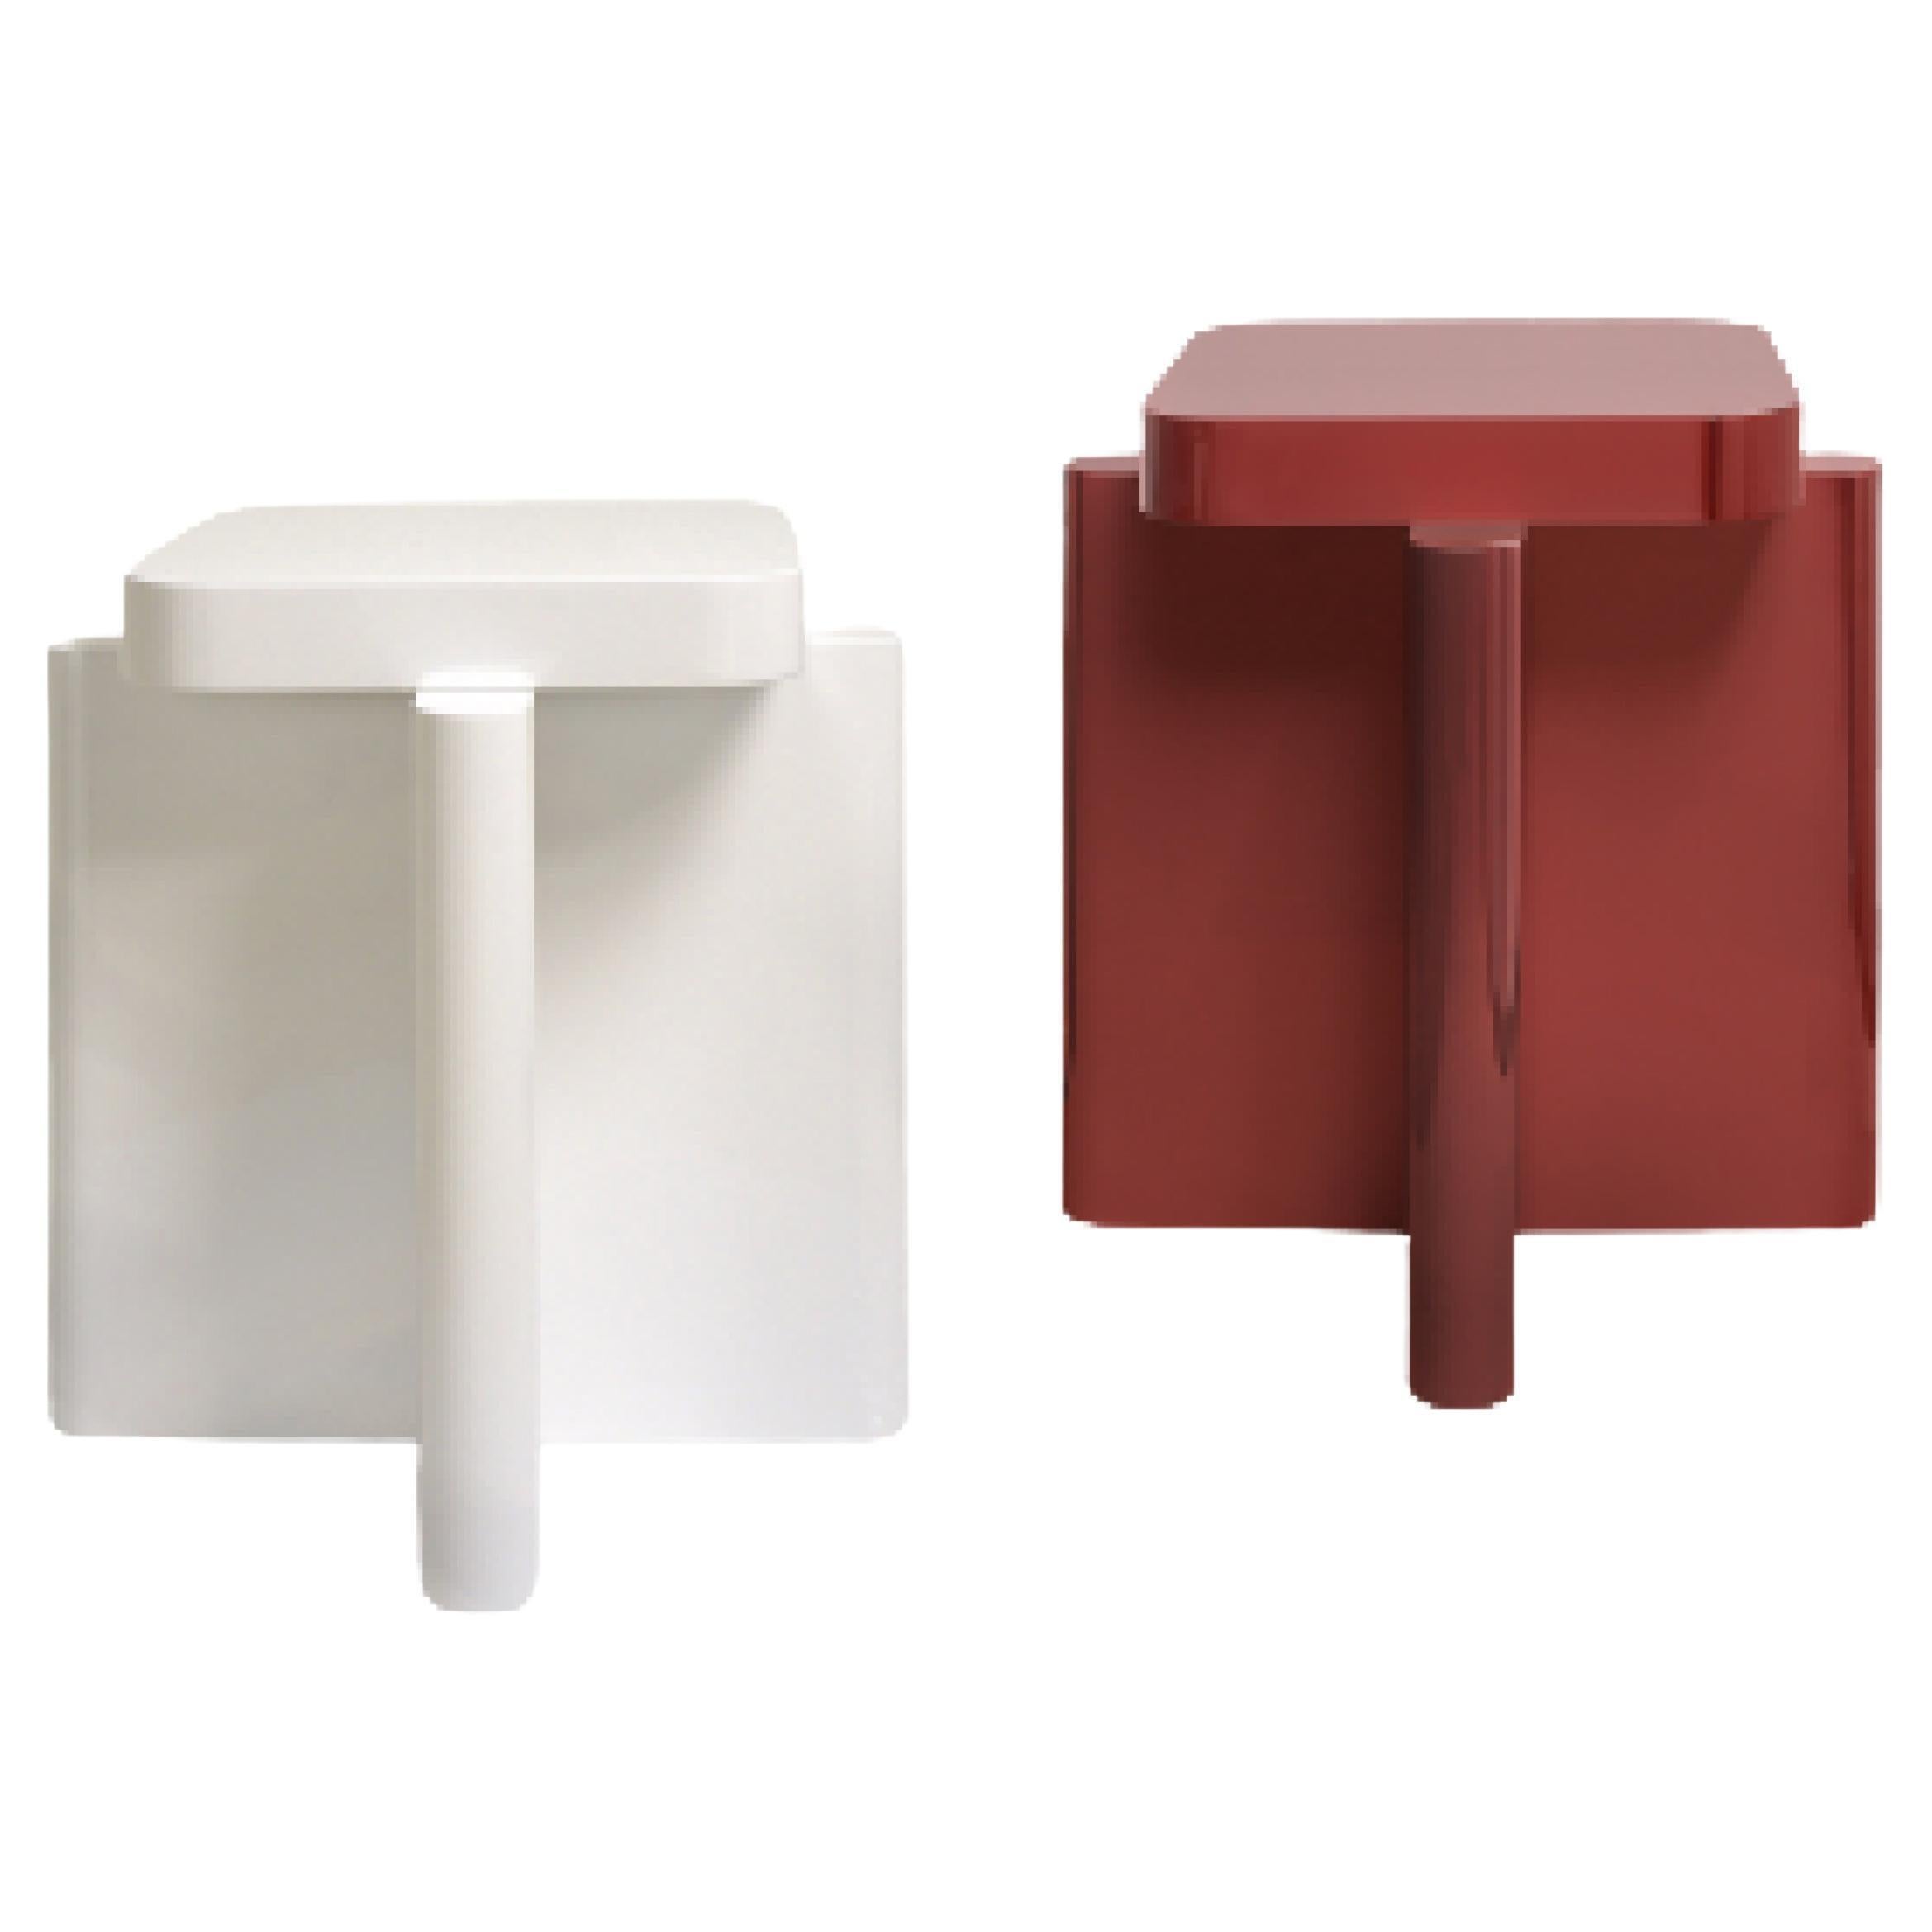 Pair of spina stool by Cara Davide
Dimensions: D 40 x W 40 x H 45 cm 
Materials: nut wood, lacquered MDF. 
Also available in colors:bordeaux, caramel, dusty red, off-white, and natural wood.


Spina is a collection of lacquered tables and